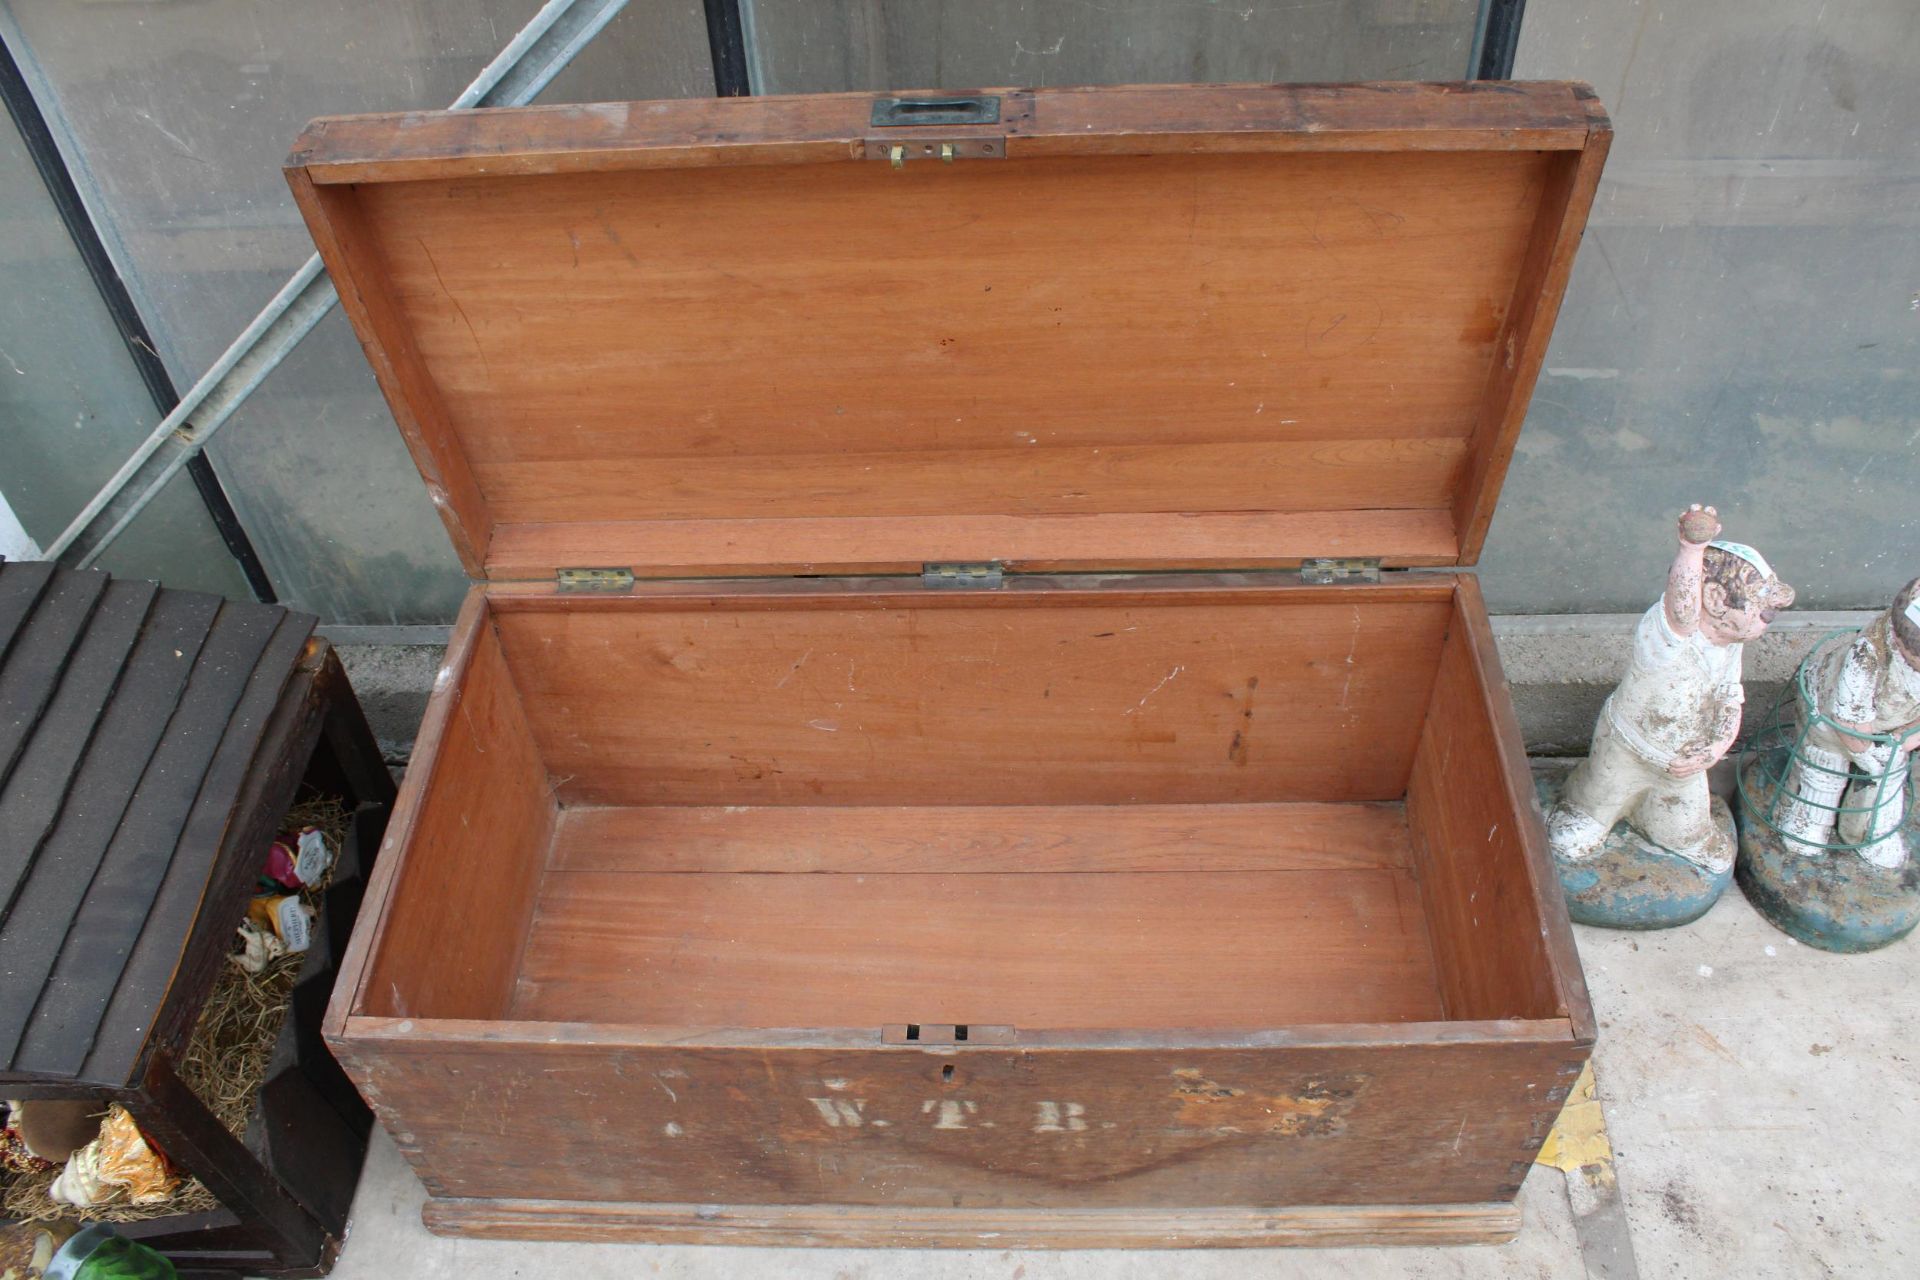 A VINTAGE PINE LIDDED TOOL CHEST - Image 3 of 3